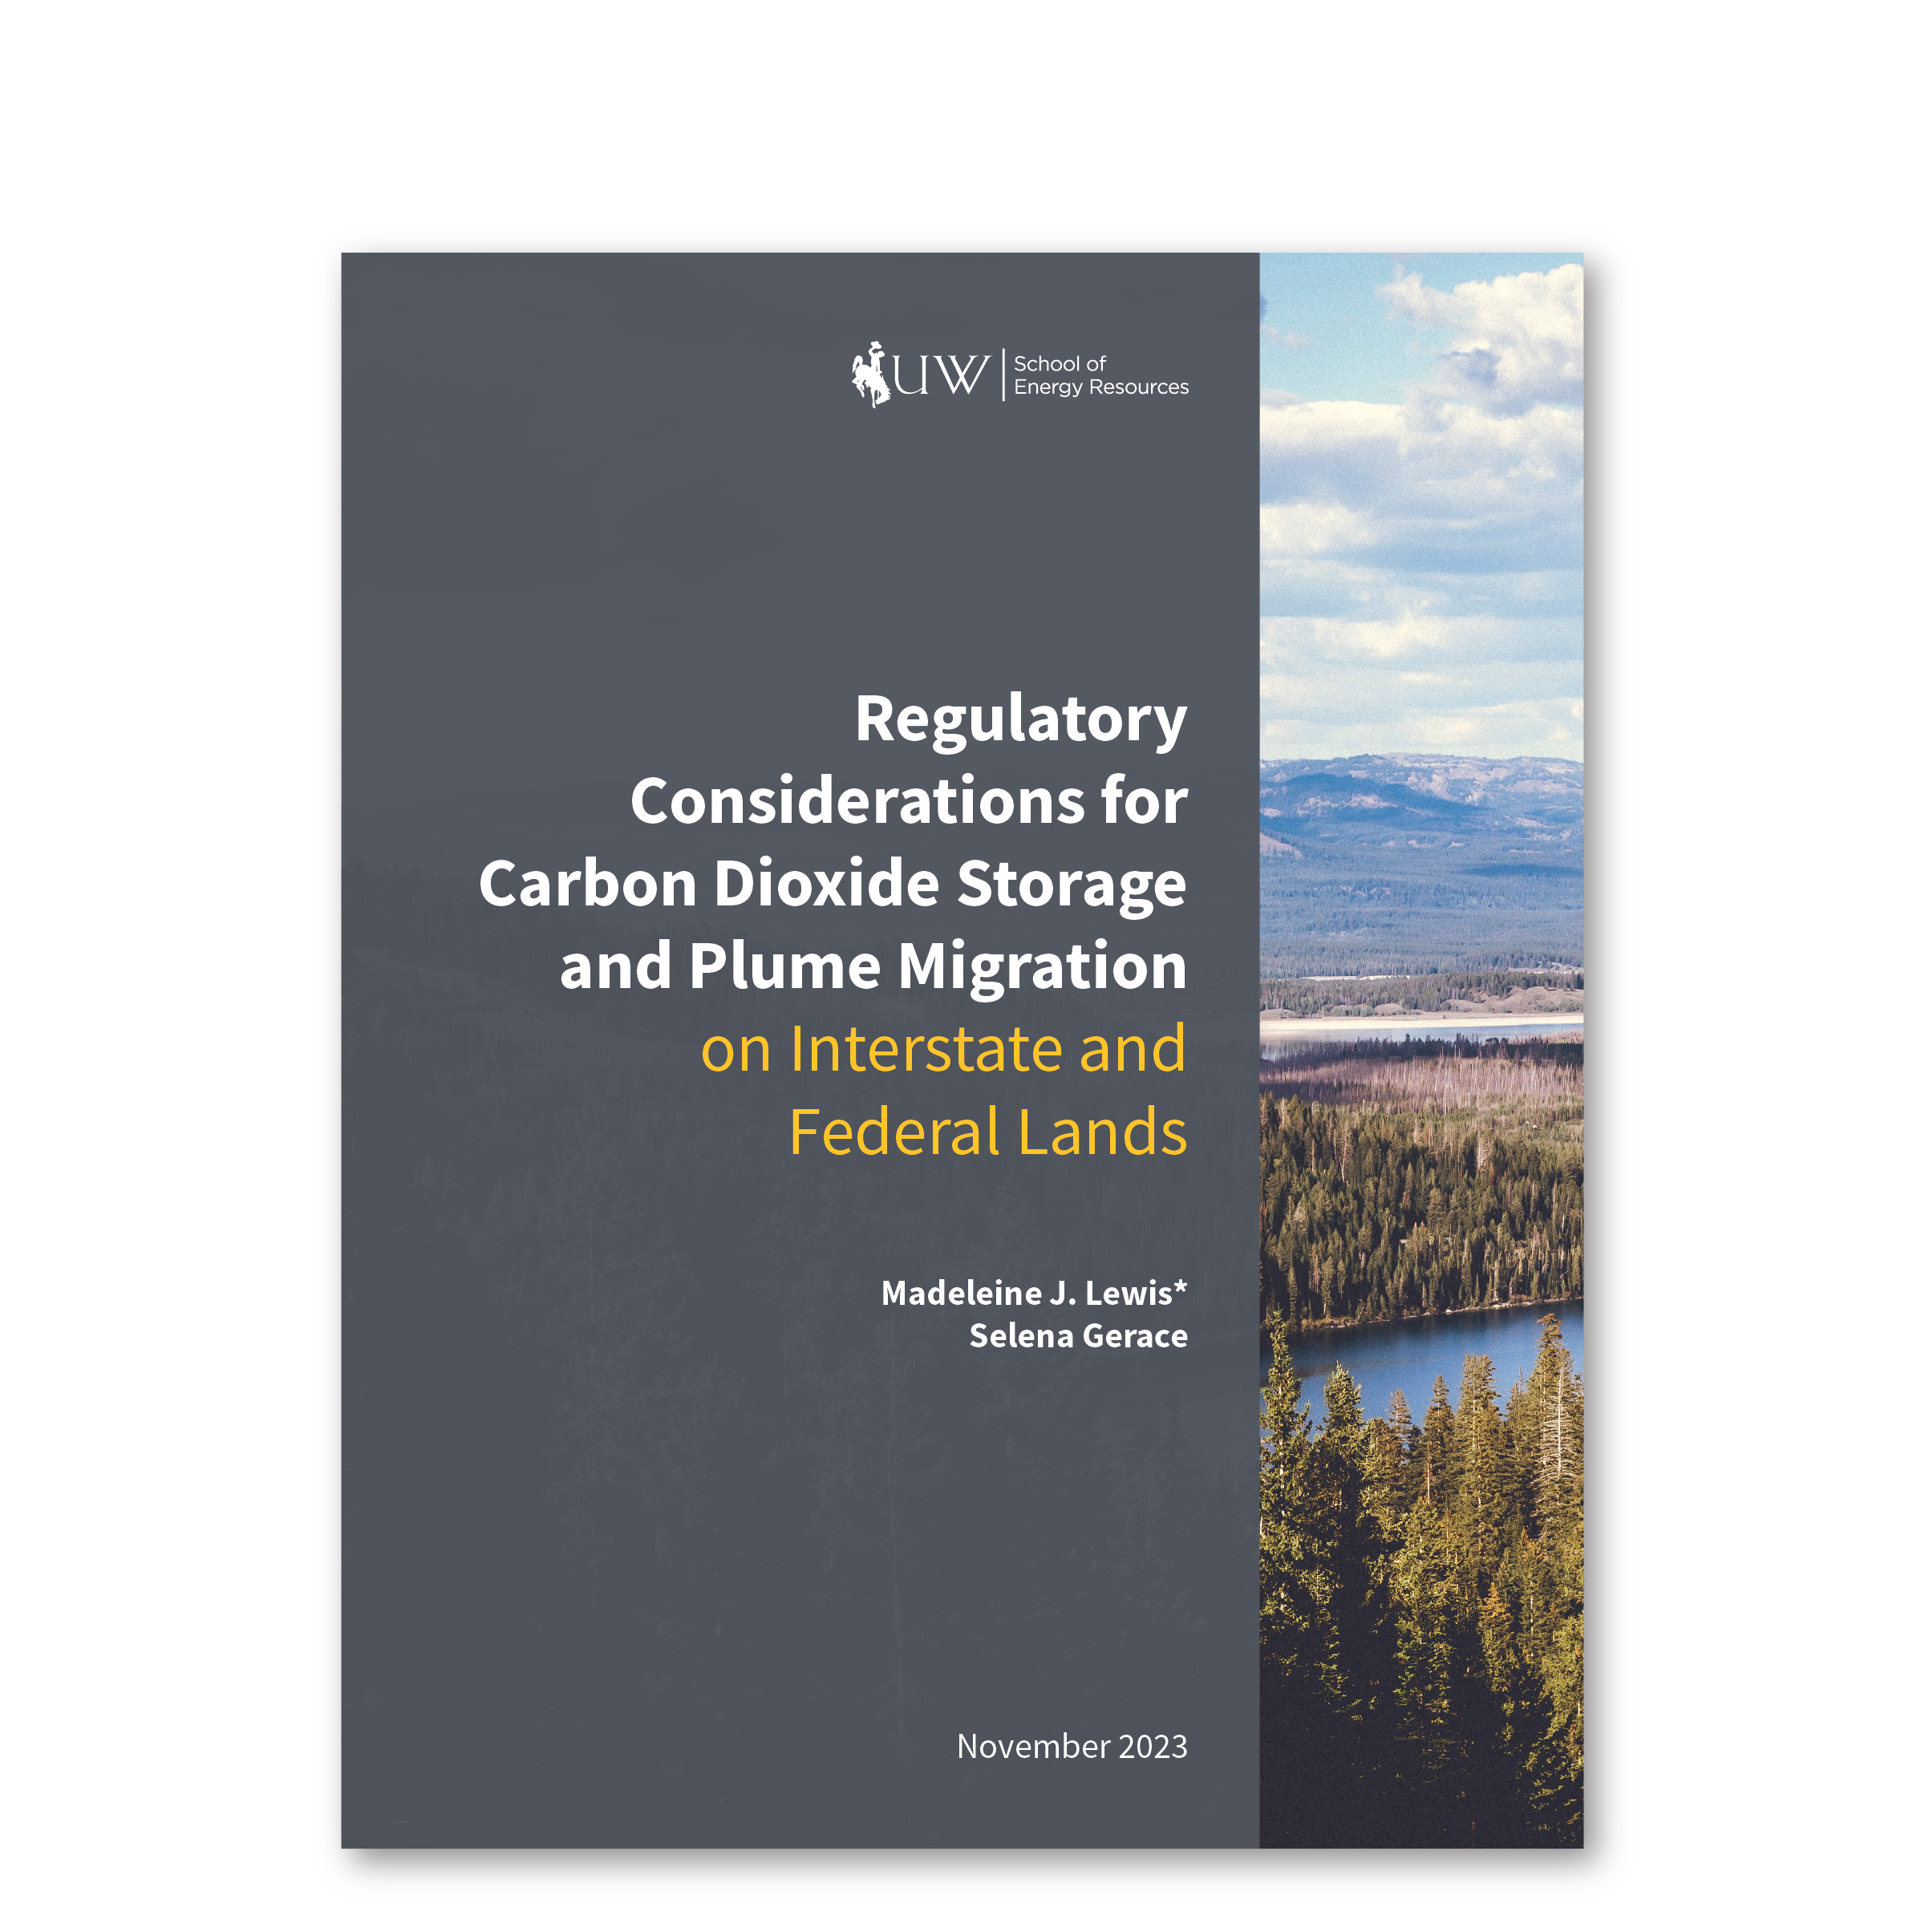 Regulatory Considerations for Carbon Dioxide Storage and Plume Migration on Interstate and Federal Lands